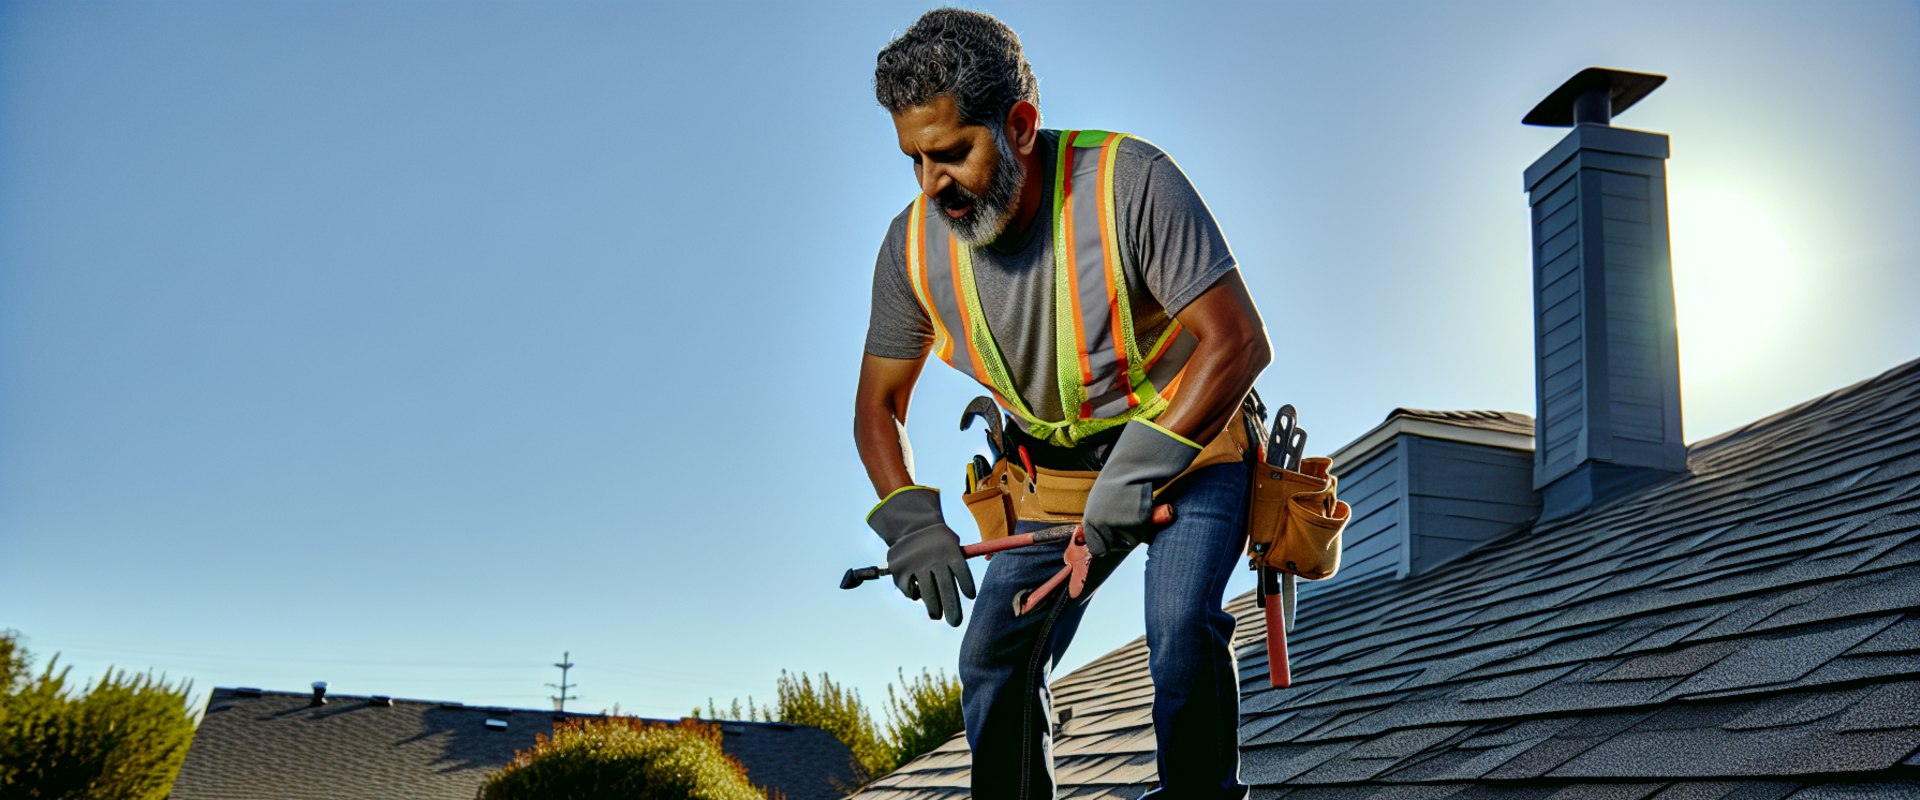 All You Need to Know About Company A's Roofing and Siding Services